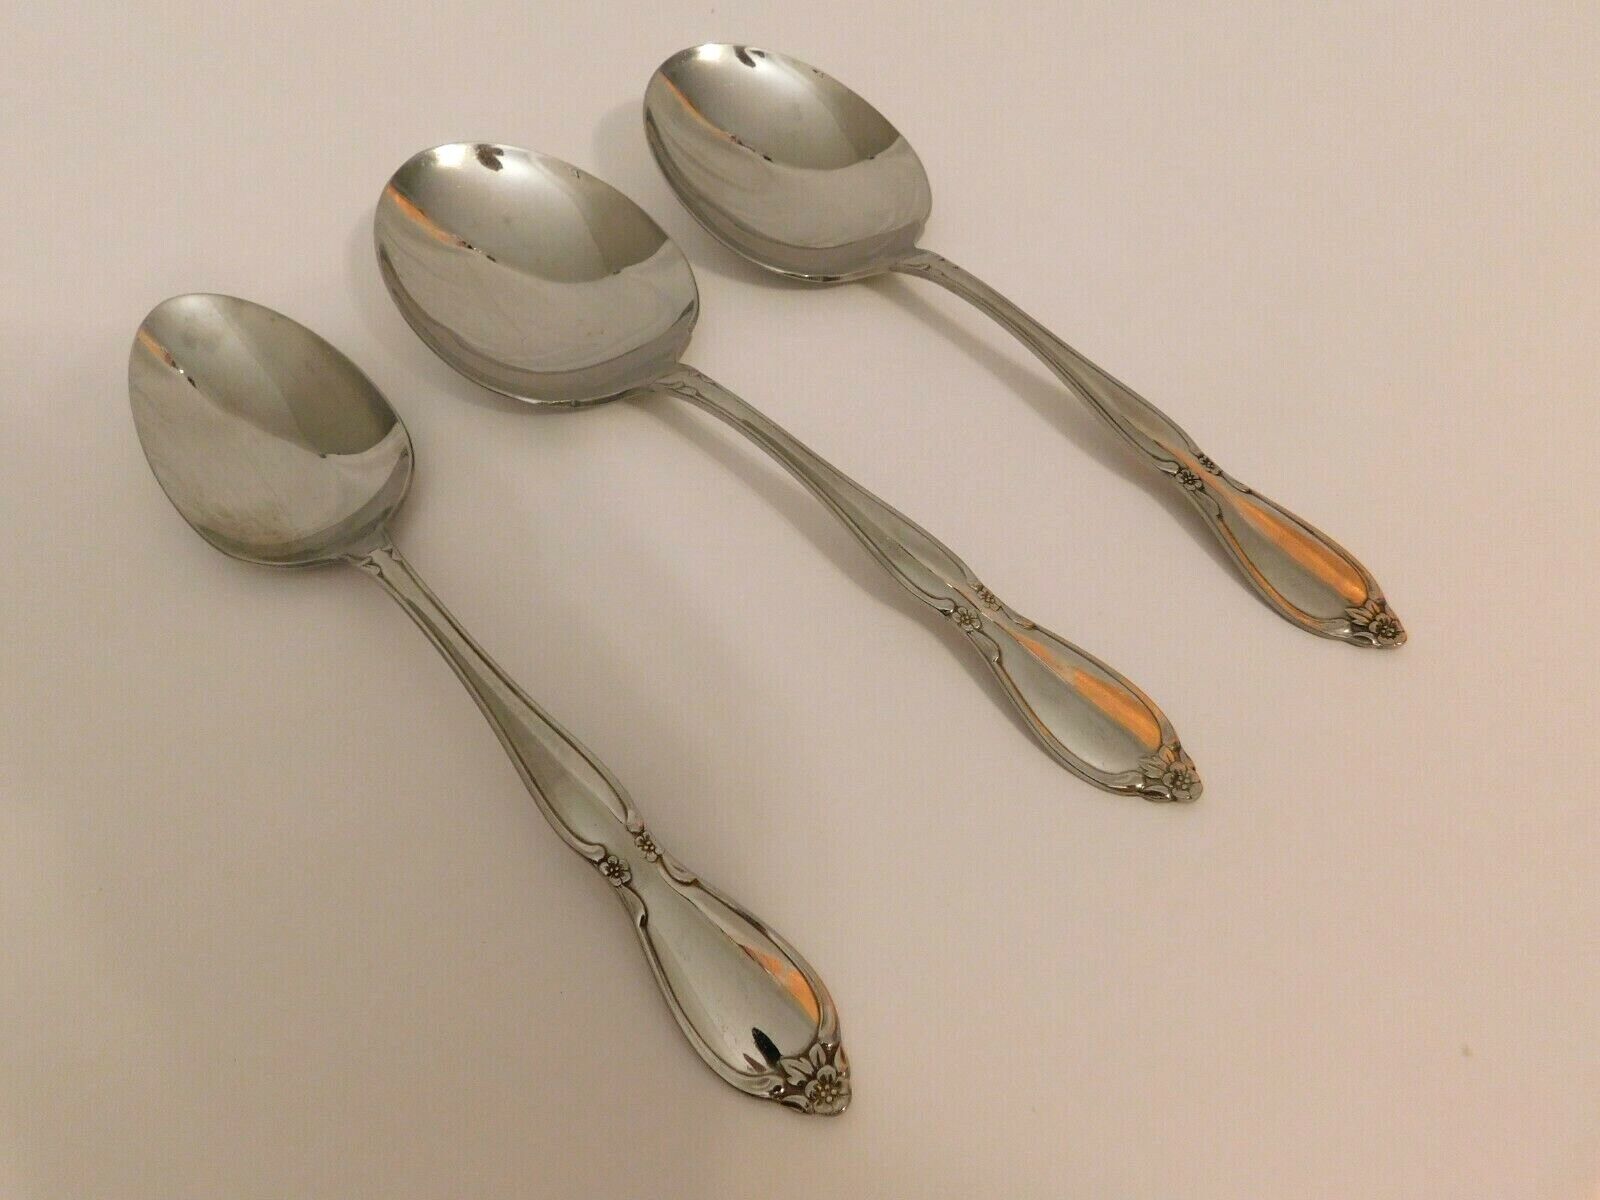 A3 - Oneida Community Stainless Chatelaine Tablespoon + 2 Round Casserole Spoons